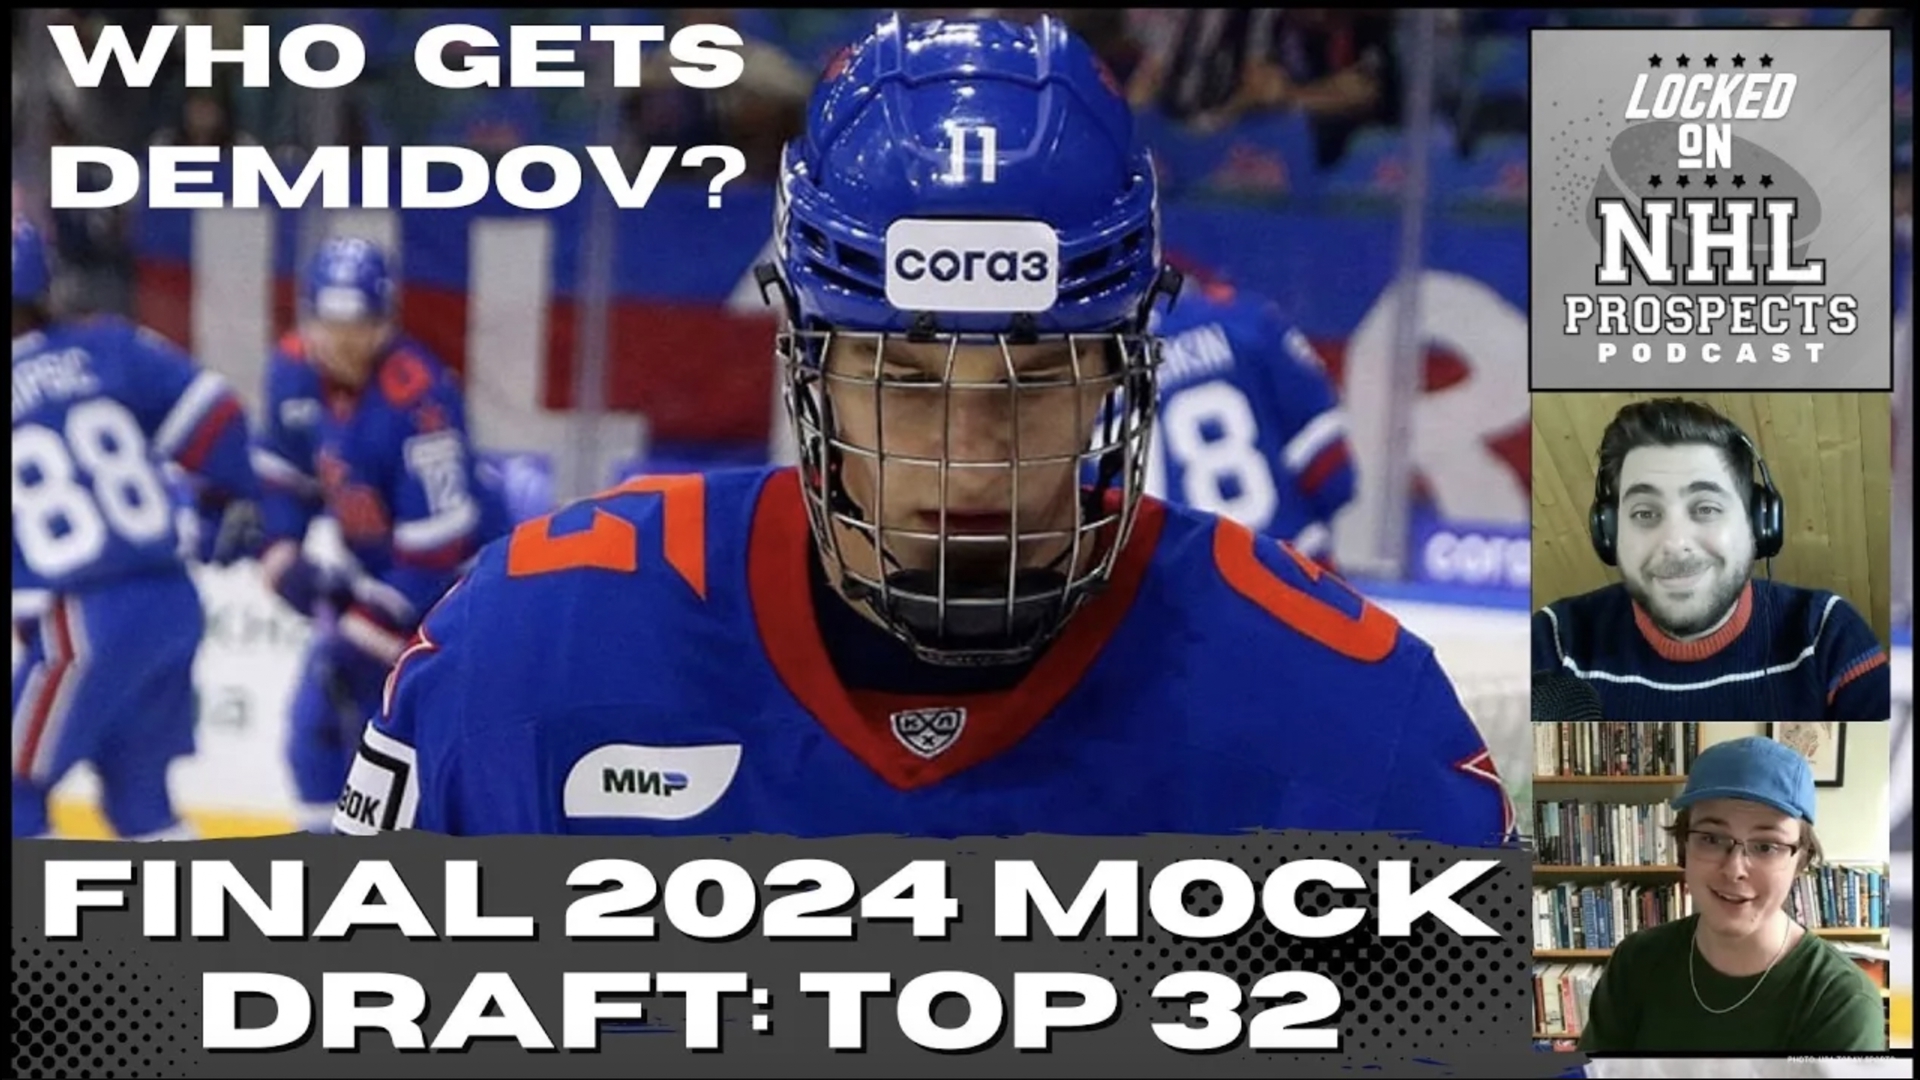 In this episode, we present our Top 32 Mock Draft for the 2024 class! First, we break down the Top 10 with no surprises at #1 but with a RD going 2nd to Chicago